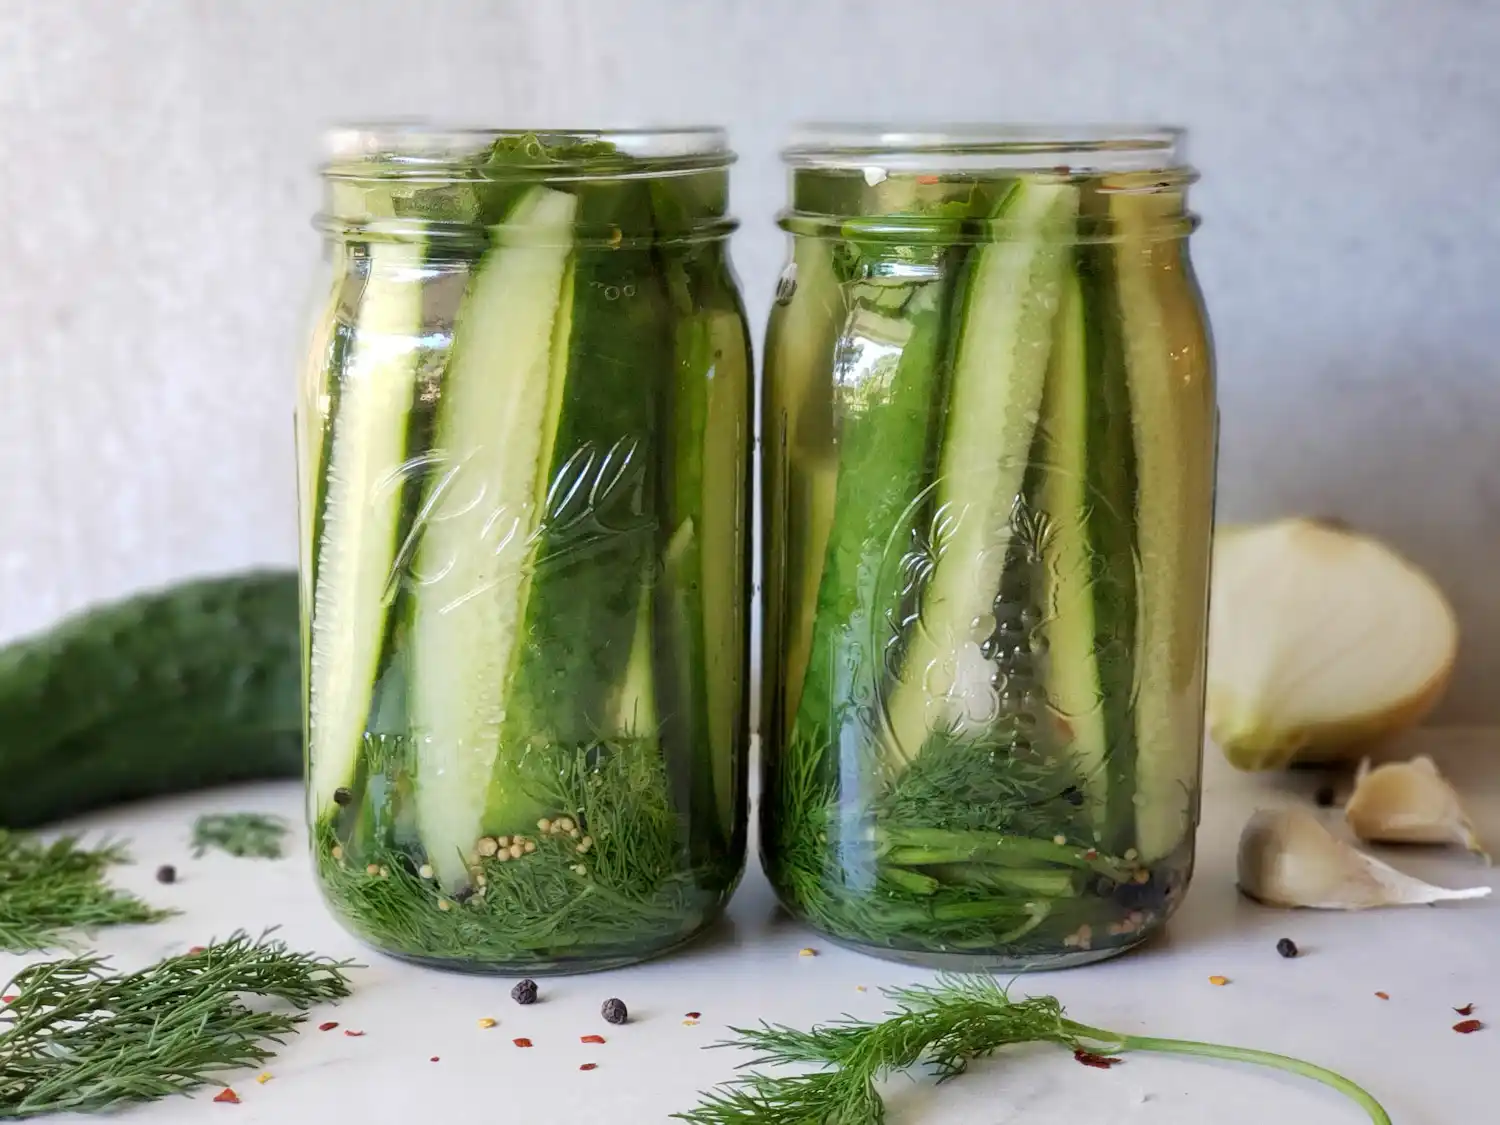 How To Make Perfectly Crunchy Homemade Dill Pickles - Step-By-Step Guide